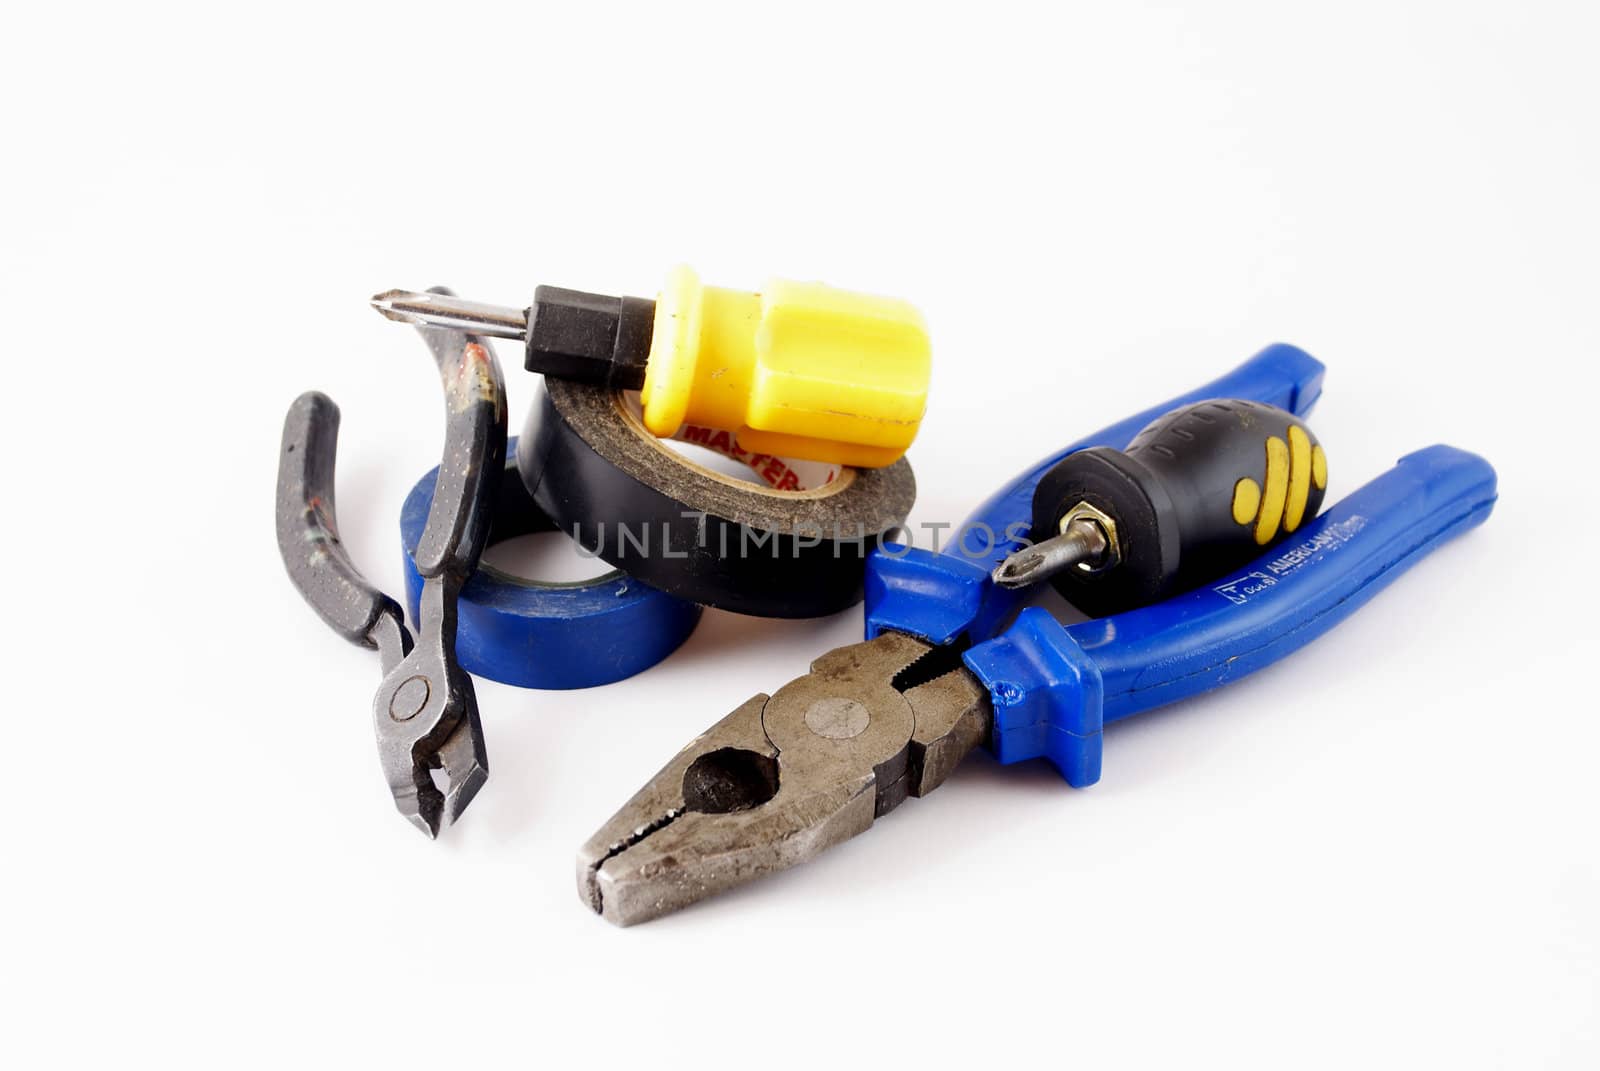 pliers, wire cutters, screwdrivers, electrical tape on white background